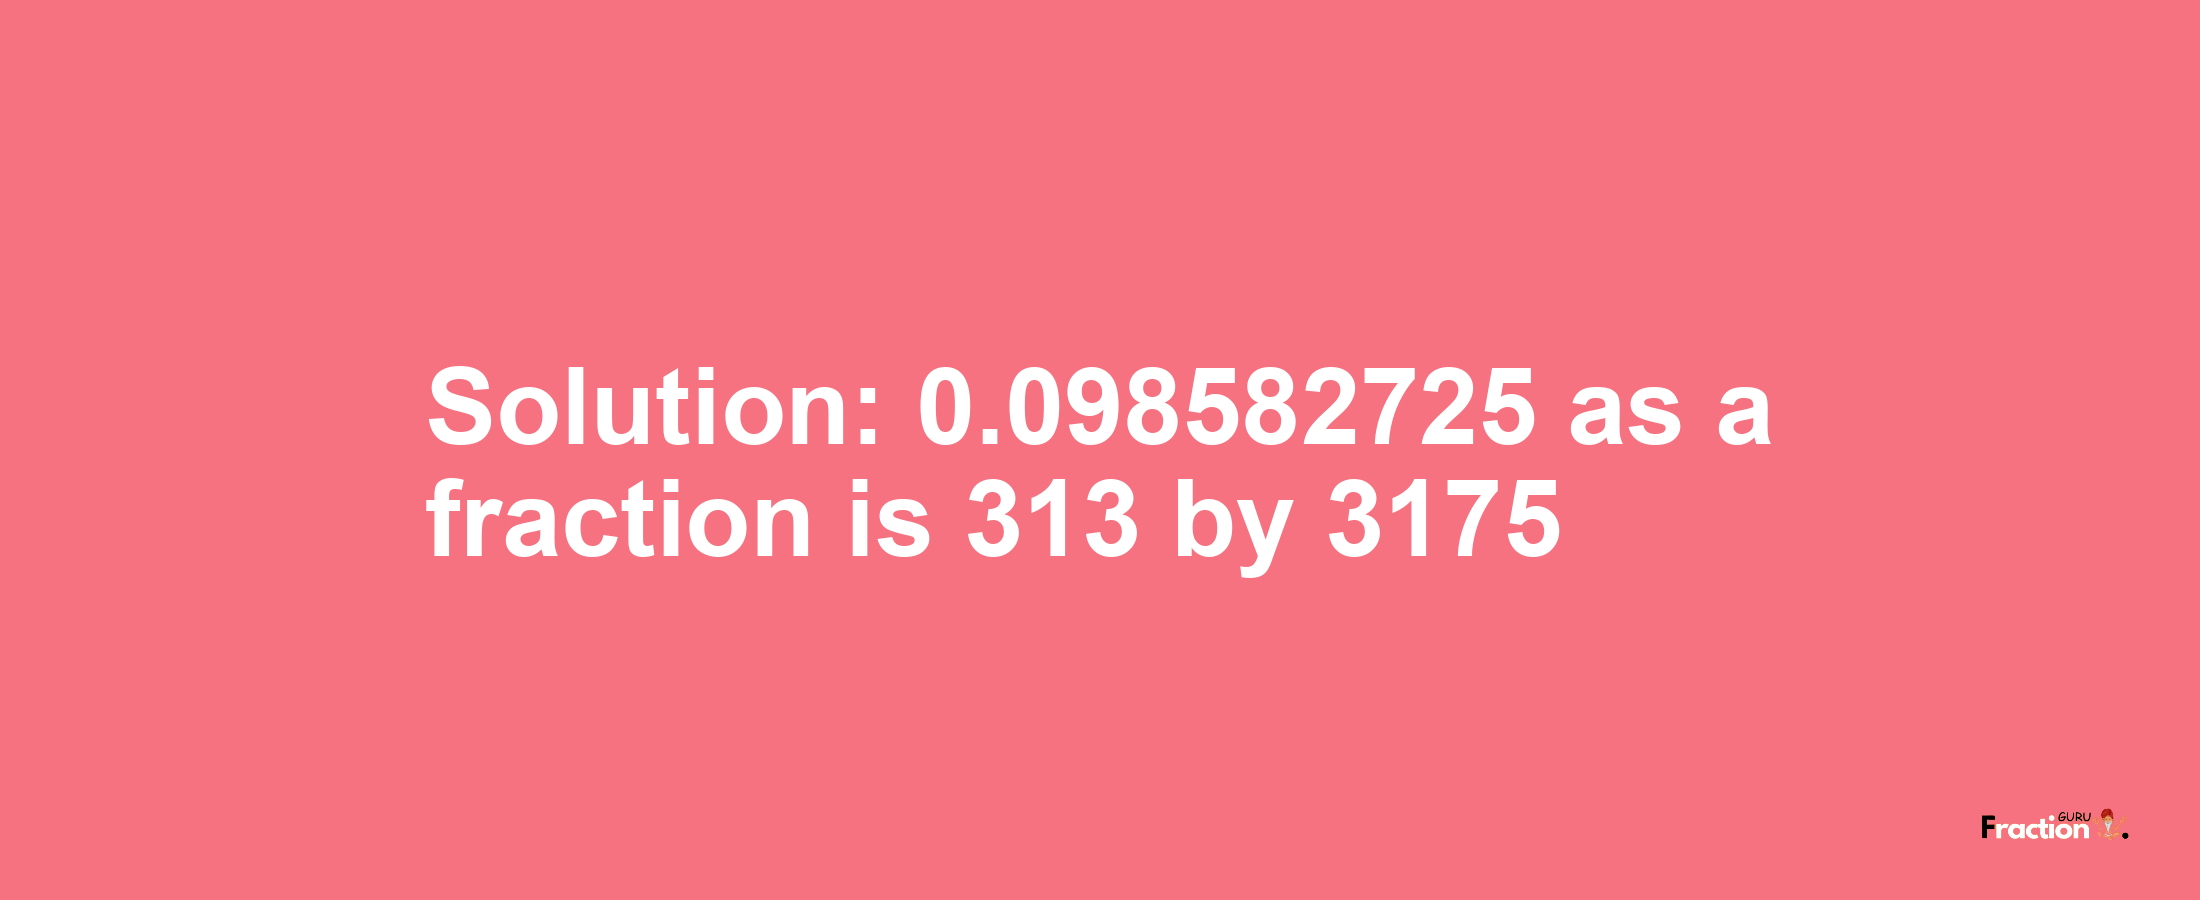 Solution:0.098582725 as a fraction is 313/3175